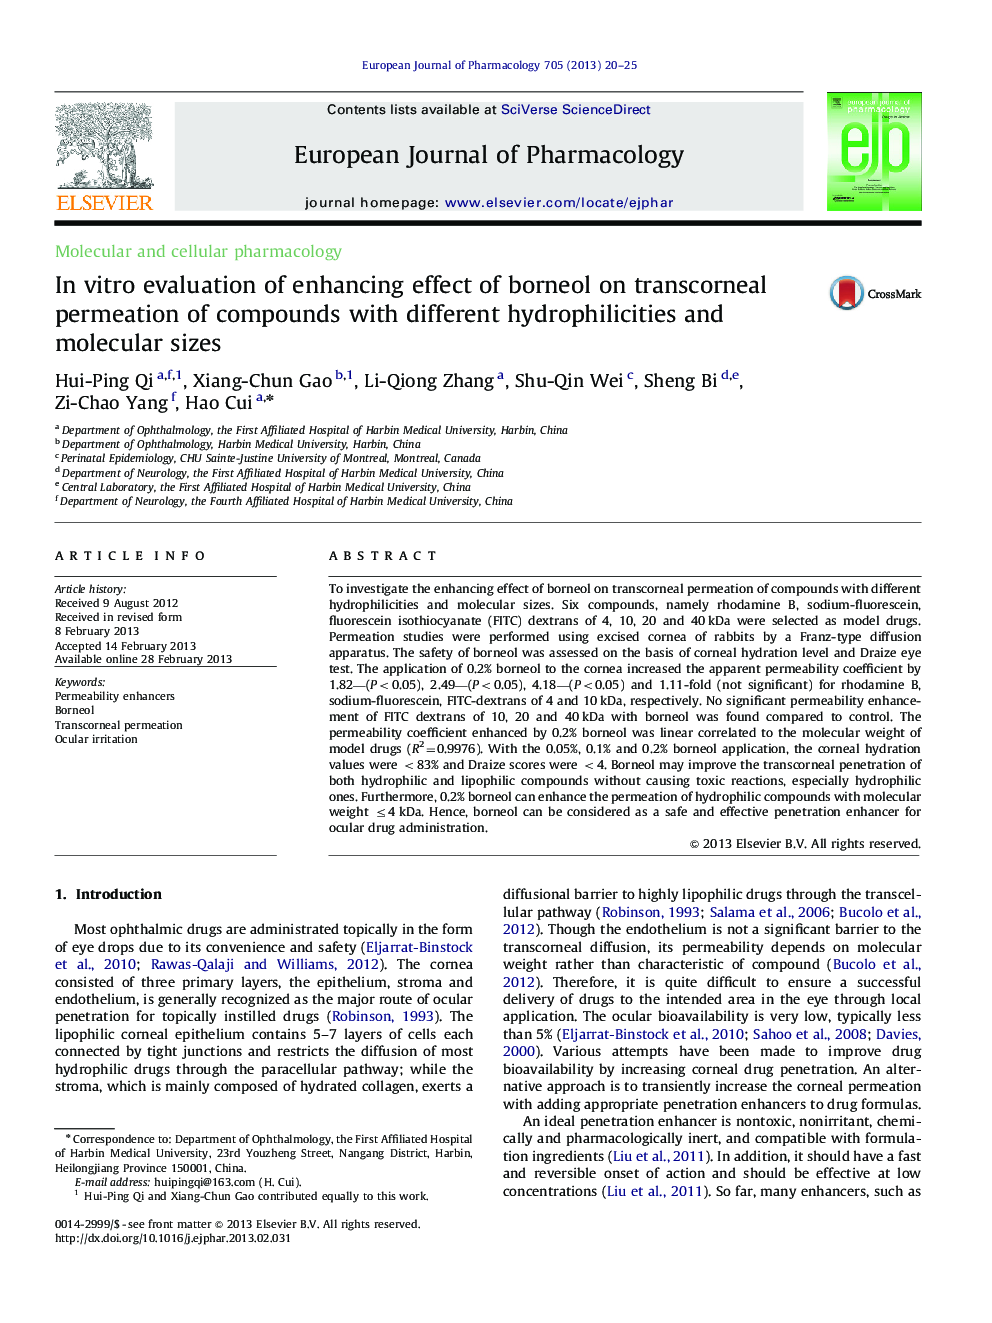 In vitro evaluation of enhancing effect of borneol on transcorneal permeation of compounds with different hydrophilicities and molecular sizes